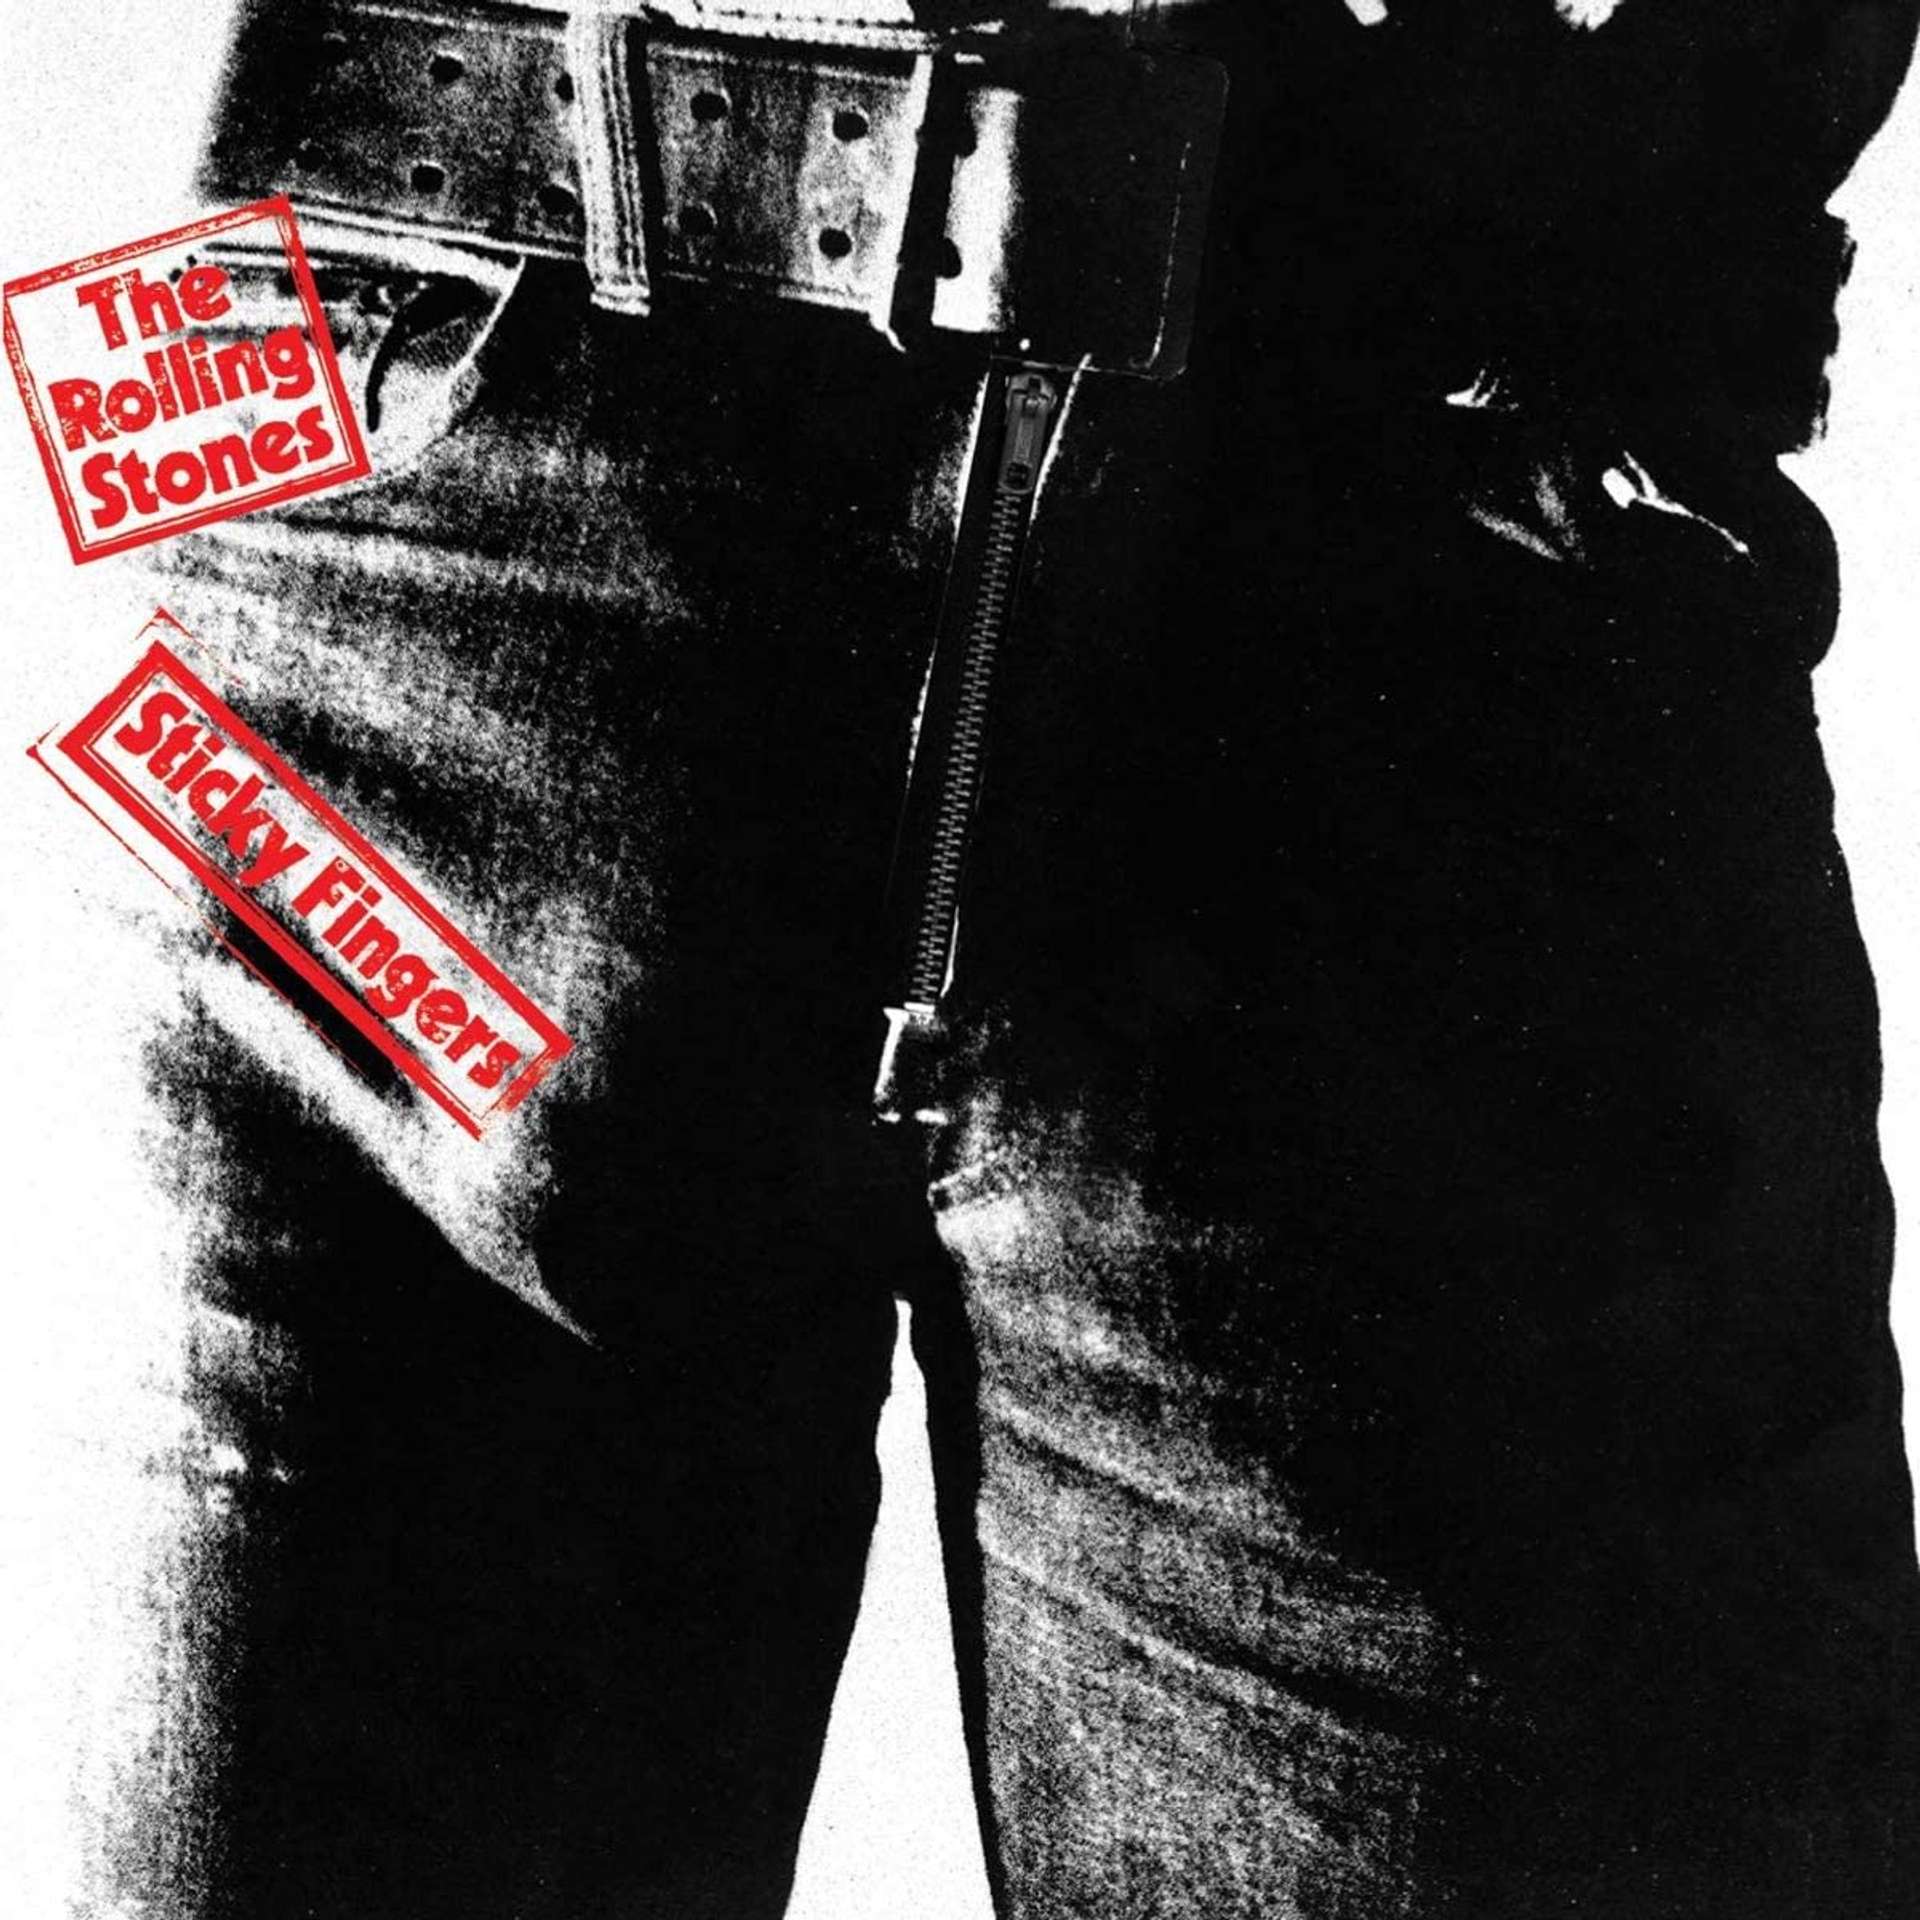 An image of the album cover for Sticky Fingers by the Rolling Stone, shot by artist Andy Warhol. It is a black and white photograph showing a close-up of a jeans-clad male crotch with the visible outline of a penis.